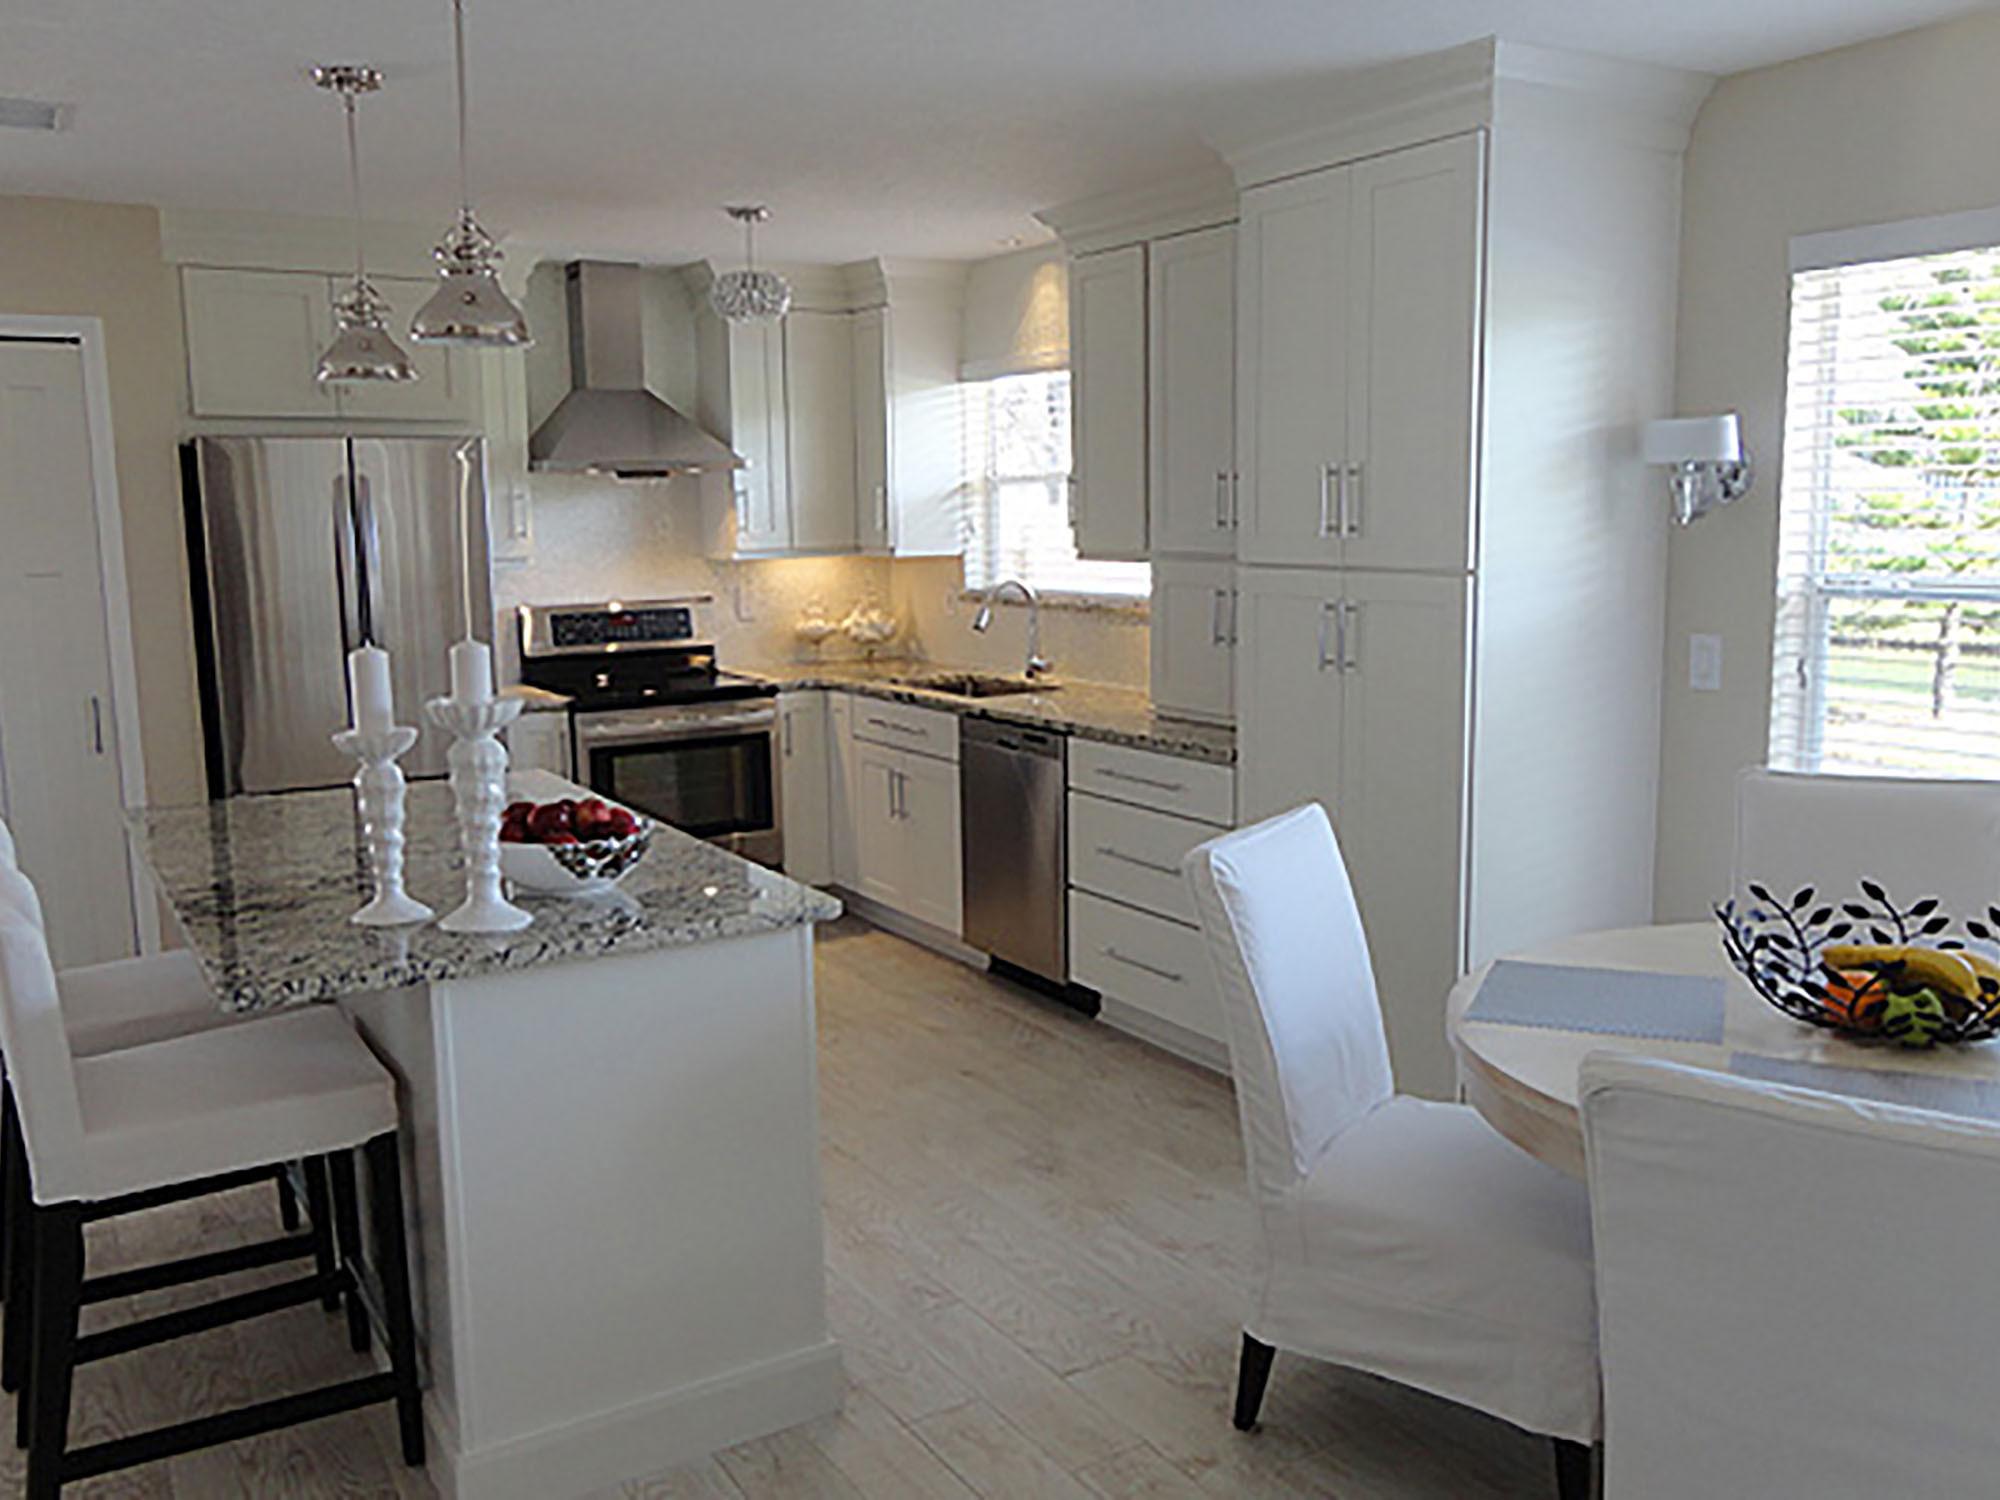 White Kitchen Remodeling
 Shaker White Painted Cabinets Florida Kitchen s